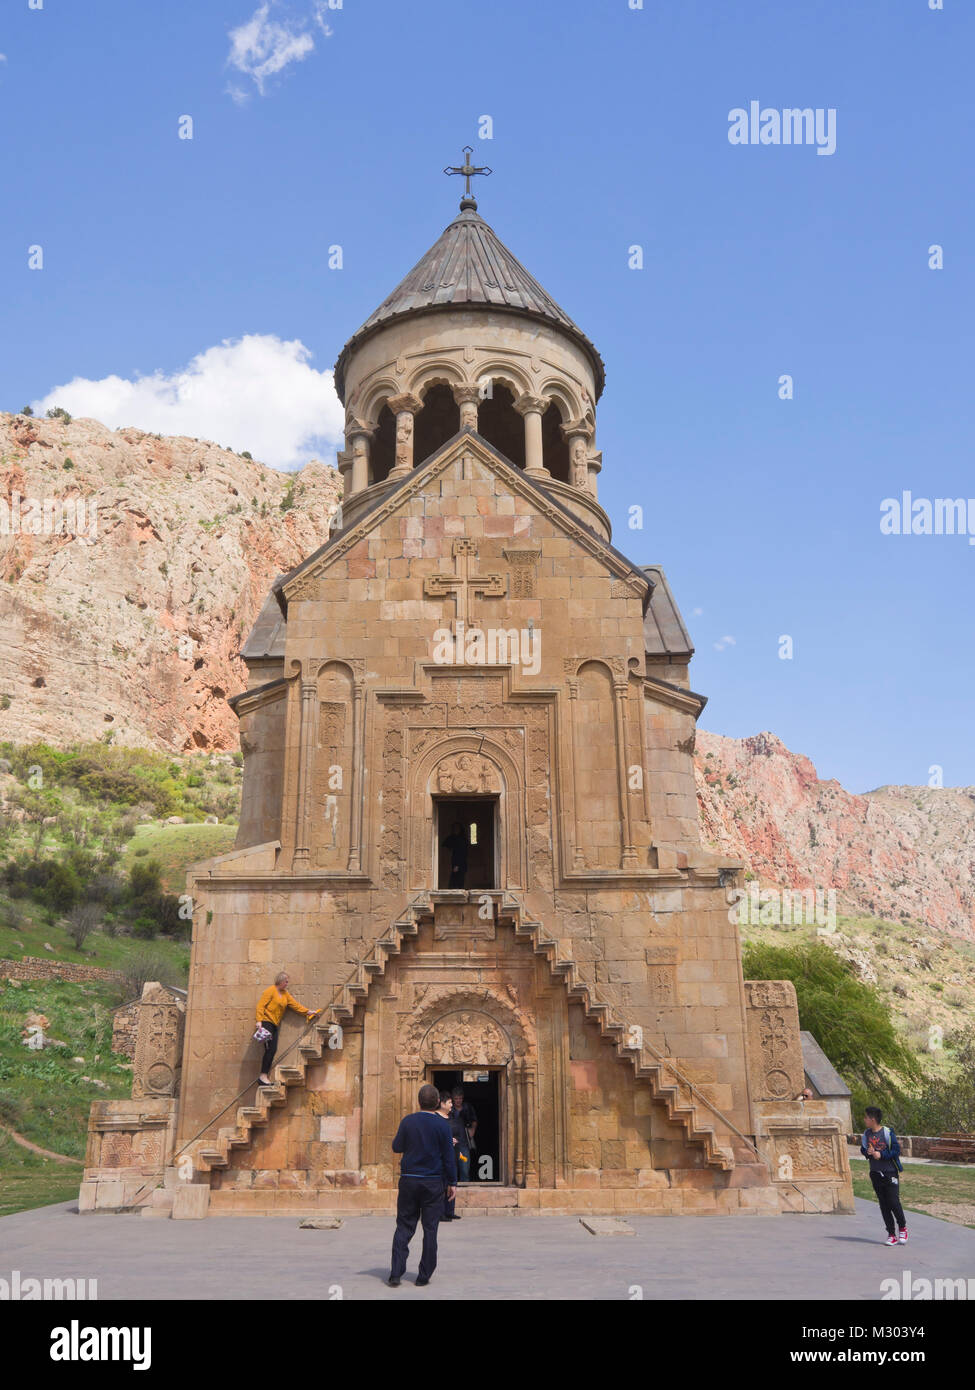 Noravank Monastery in southern Armenia, two floors with narrow staircase makes the facade of the Surb Astvatsatsin Church a special sight Stock Photo